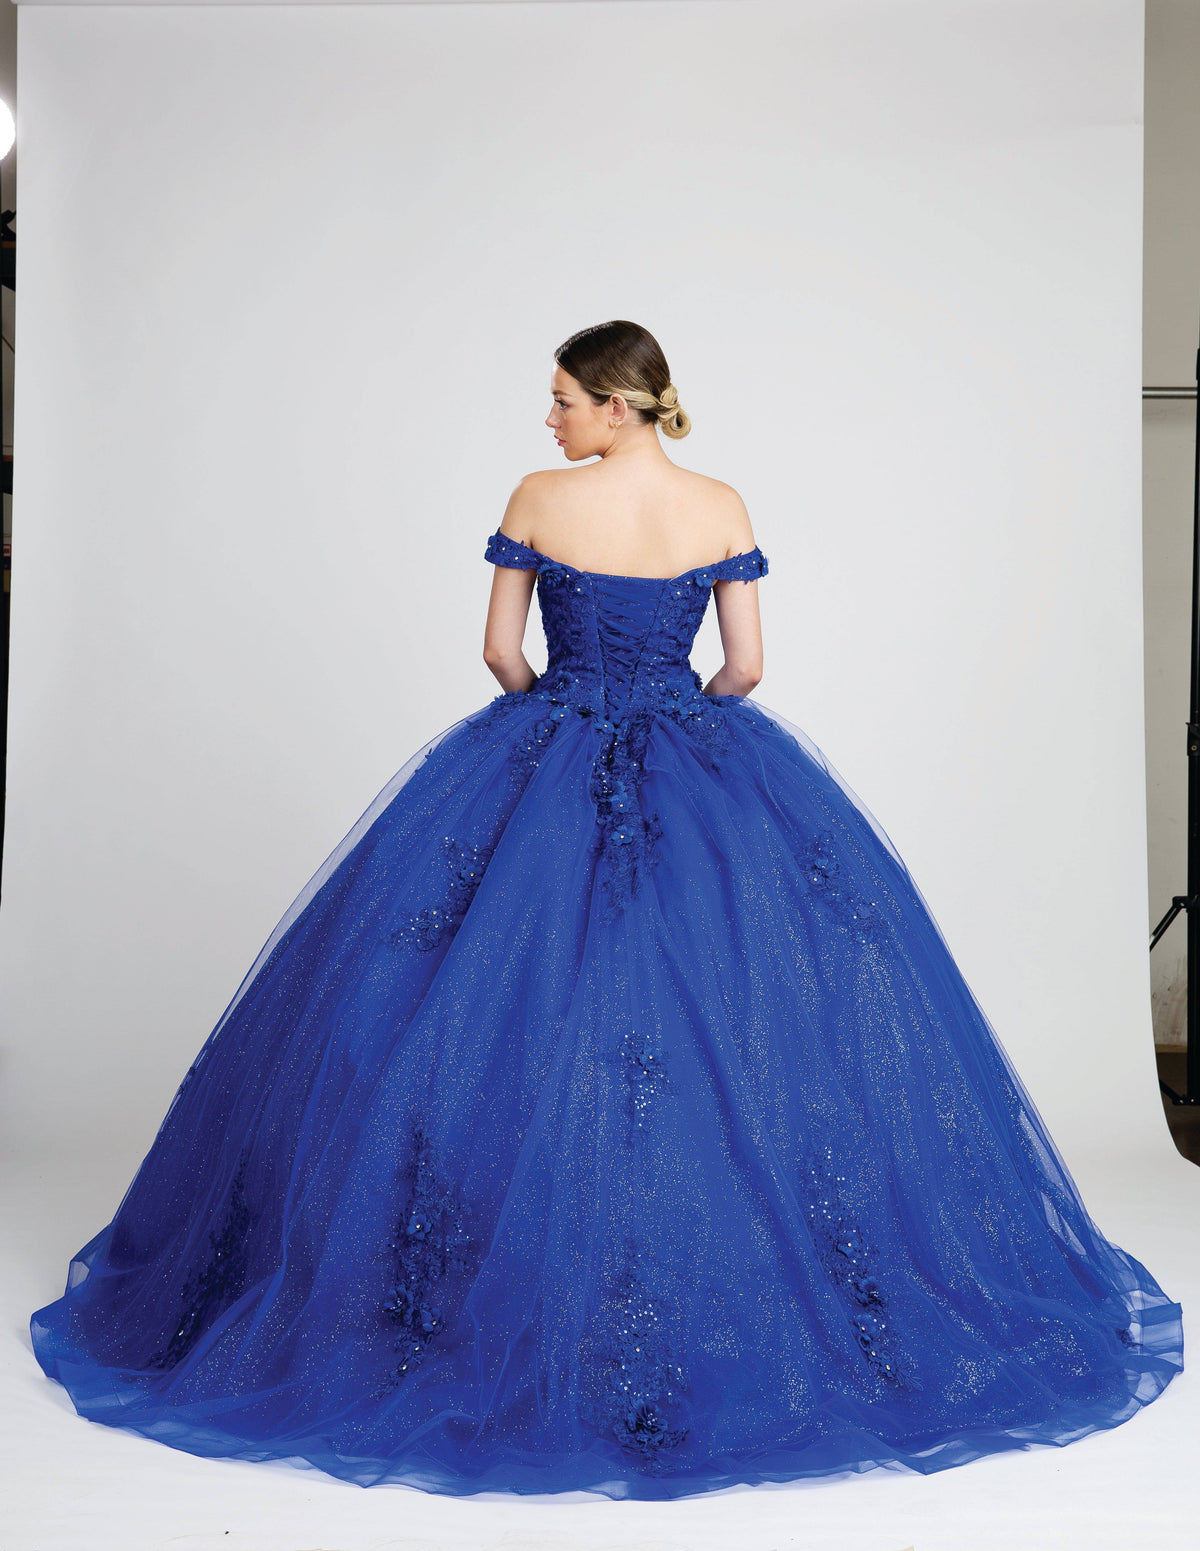 Fiesta 10280 Shimmering Quinceanera Ball Gown - NORMA REED